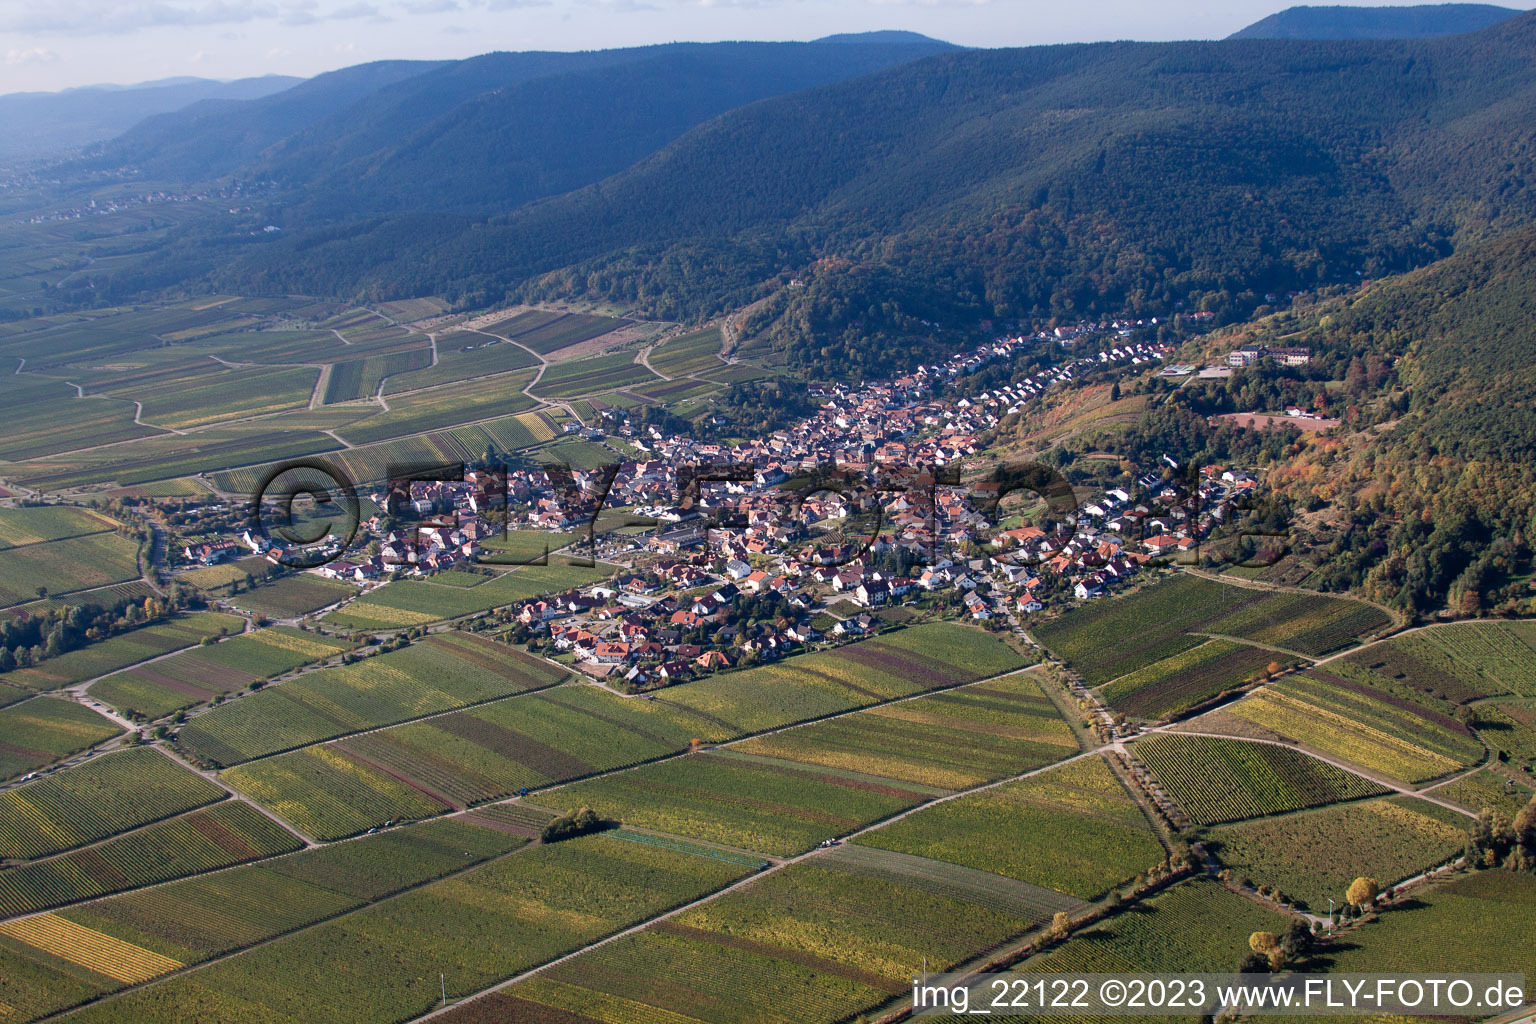 Maikammer in the state Rhineland-Palatinate, Germany seen from above